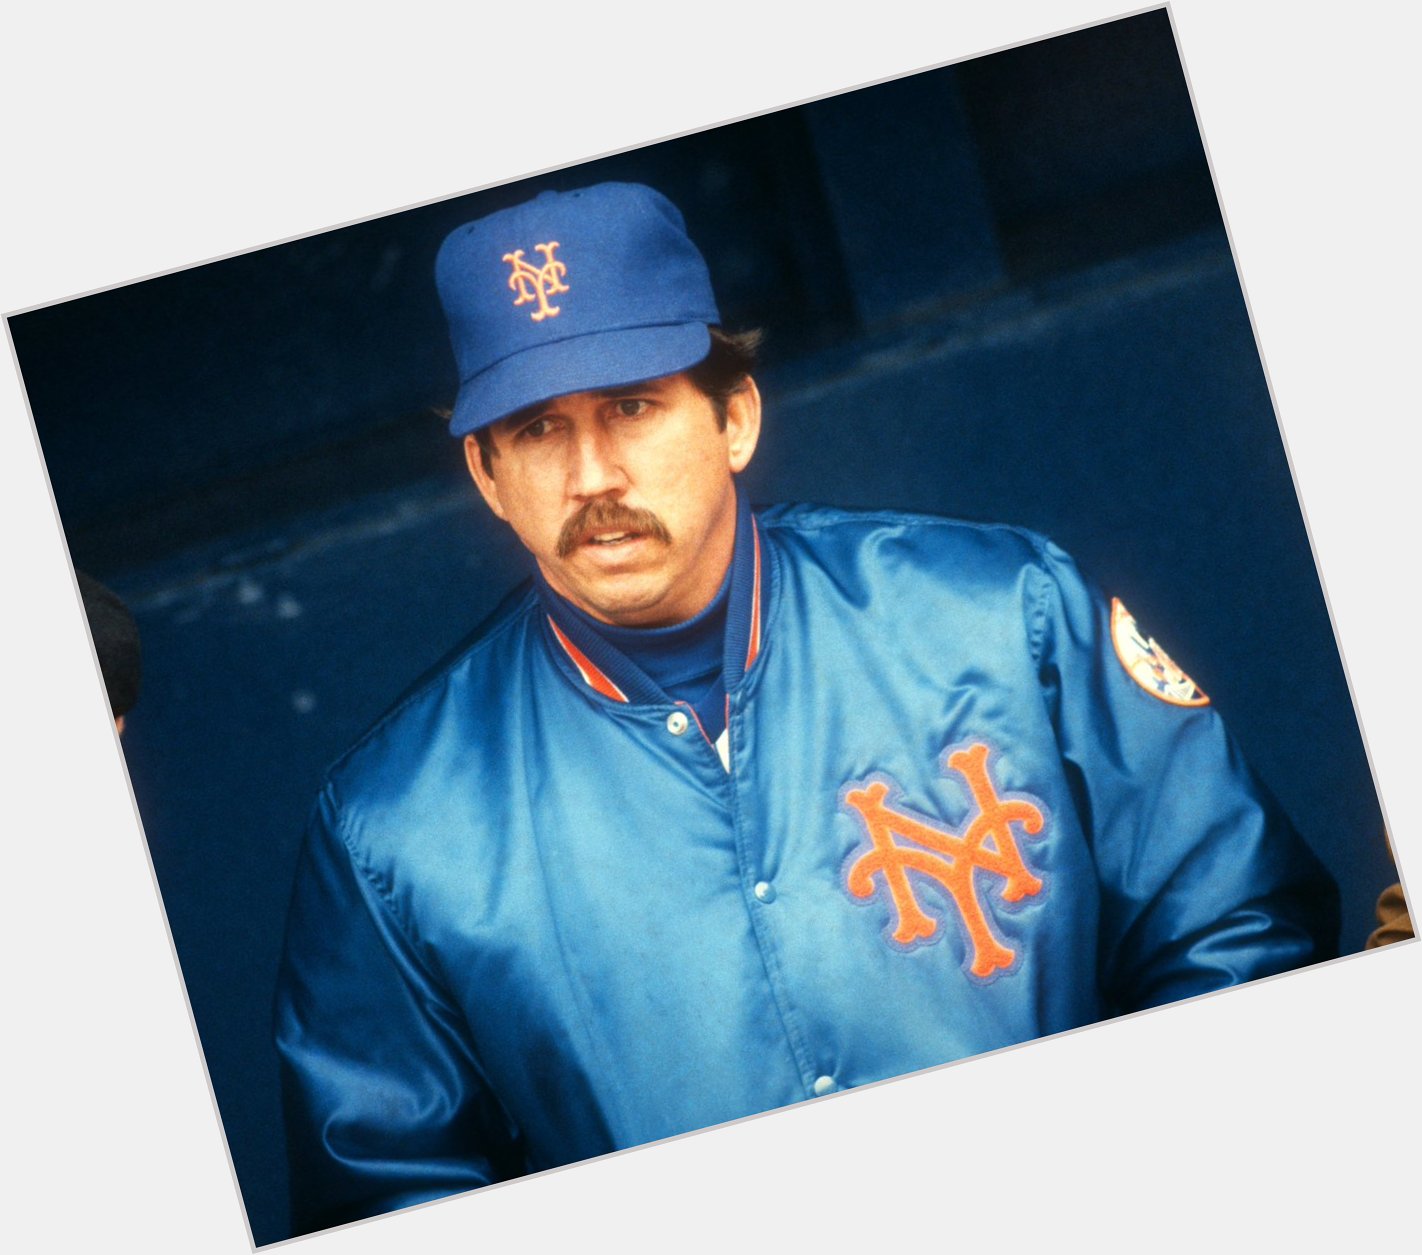 Happy birthday and best wishes to Davey Johnson, the winningest manager in Mets history, who turns 78 today 